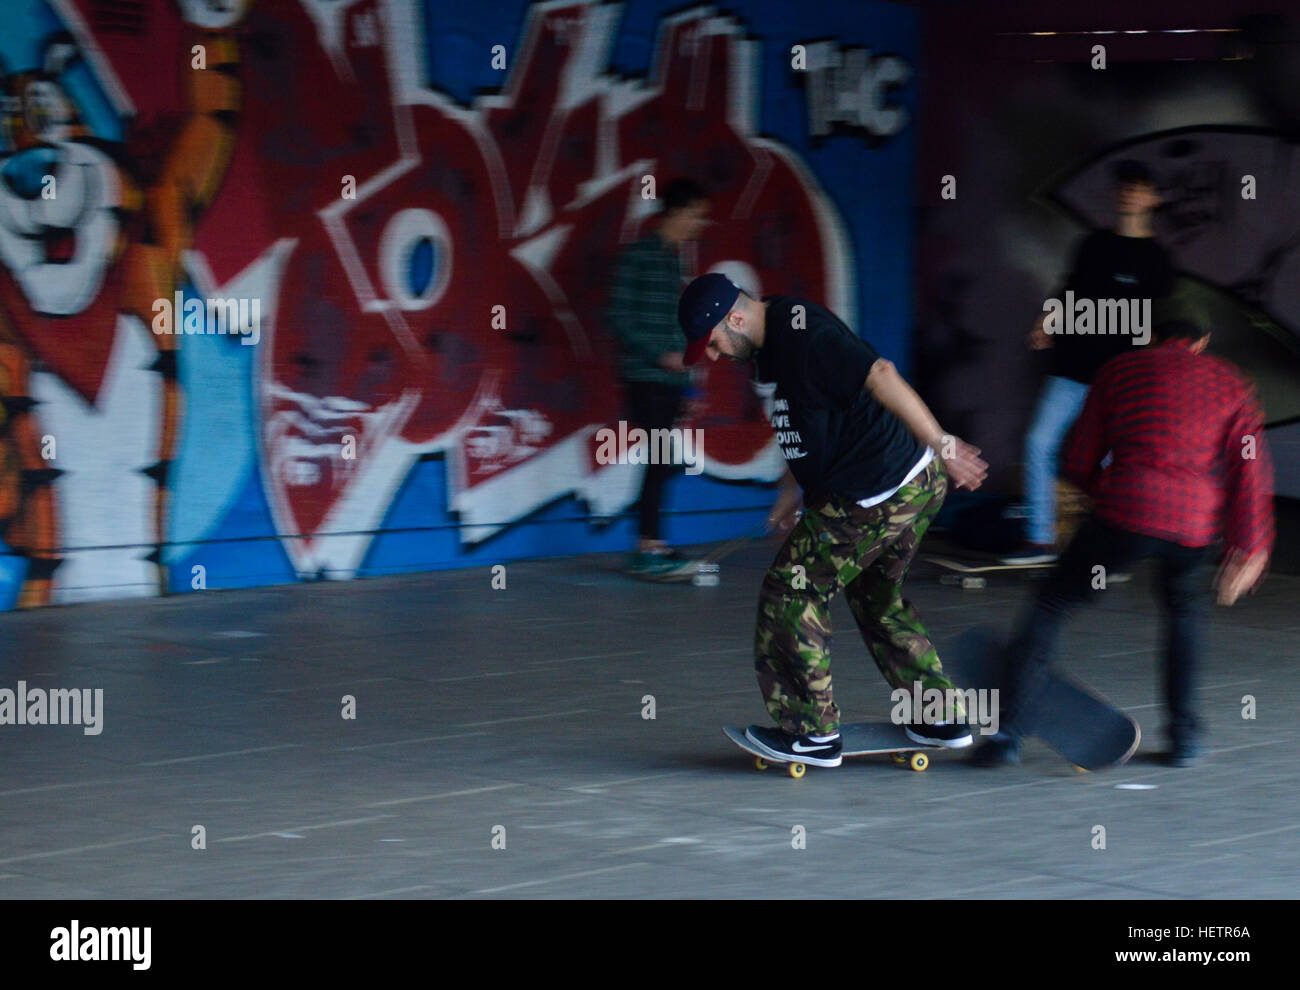 Panning of a skater in a skatepark in the South Bank of the Thames, London. Stock Photo